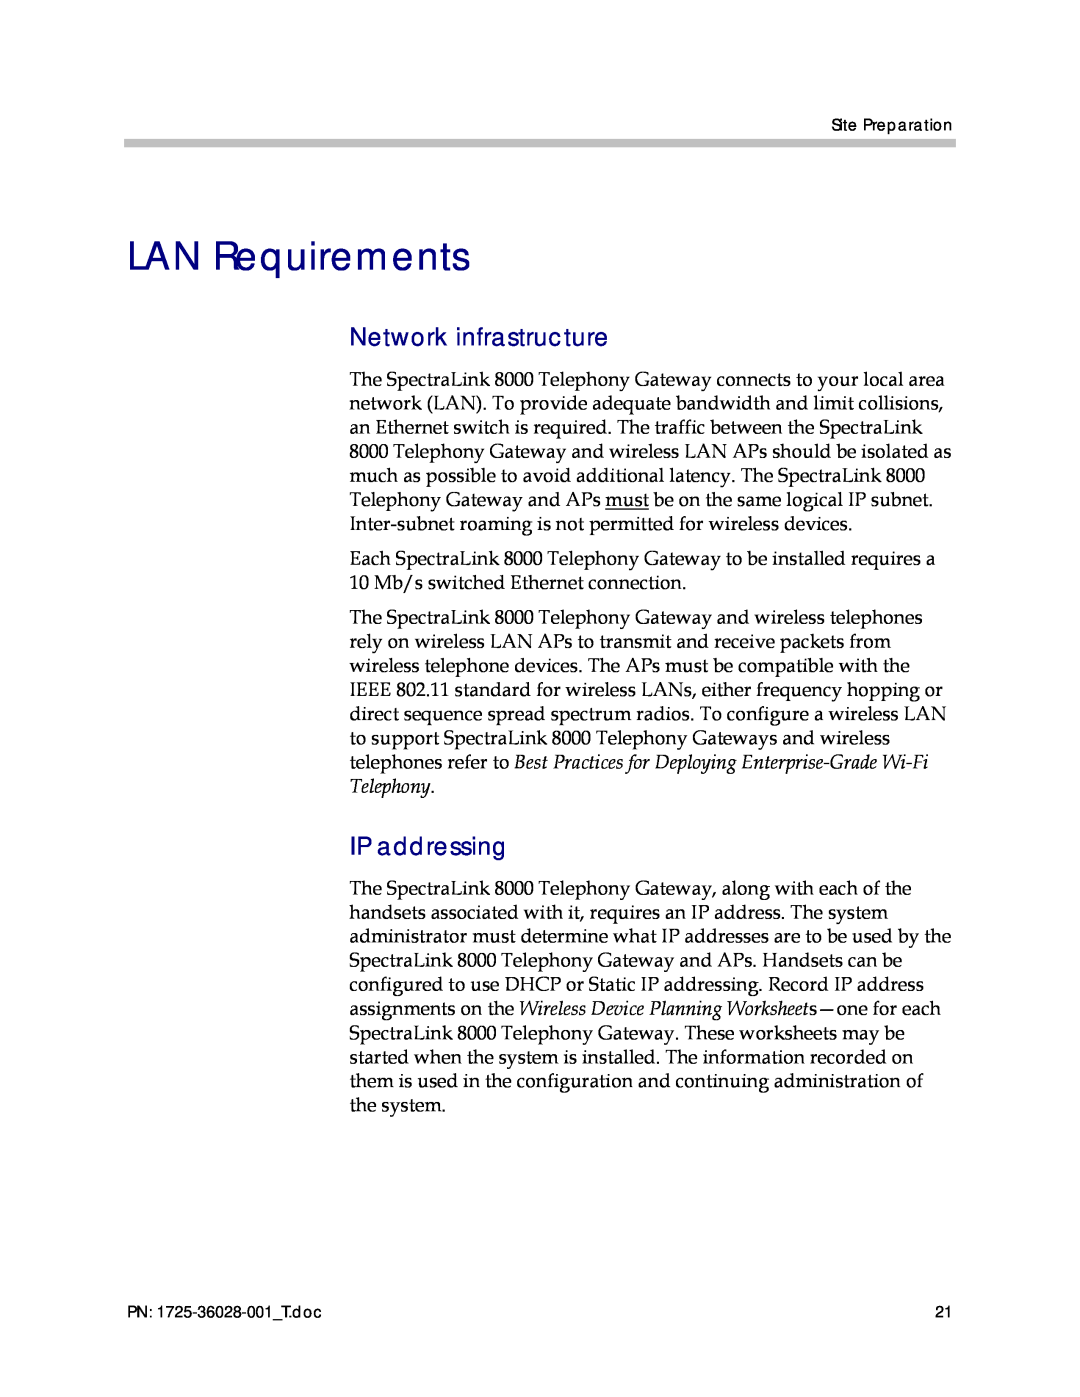 Polycom 1725-36028-001 manual LAN Requirements, Network infrastructure, IP addressing 